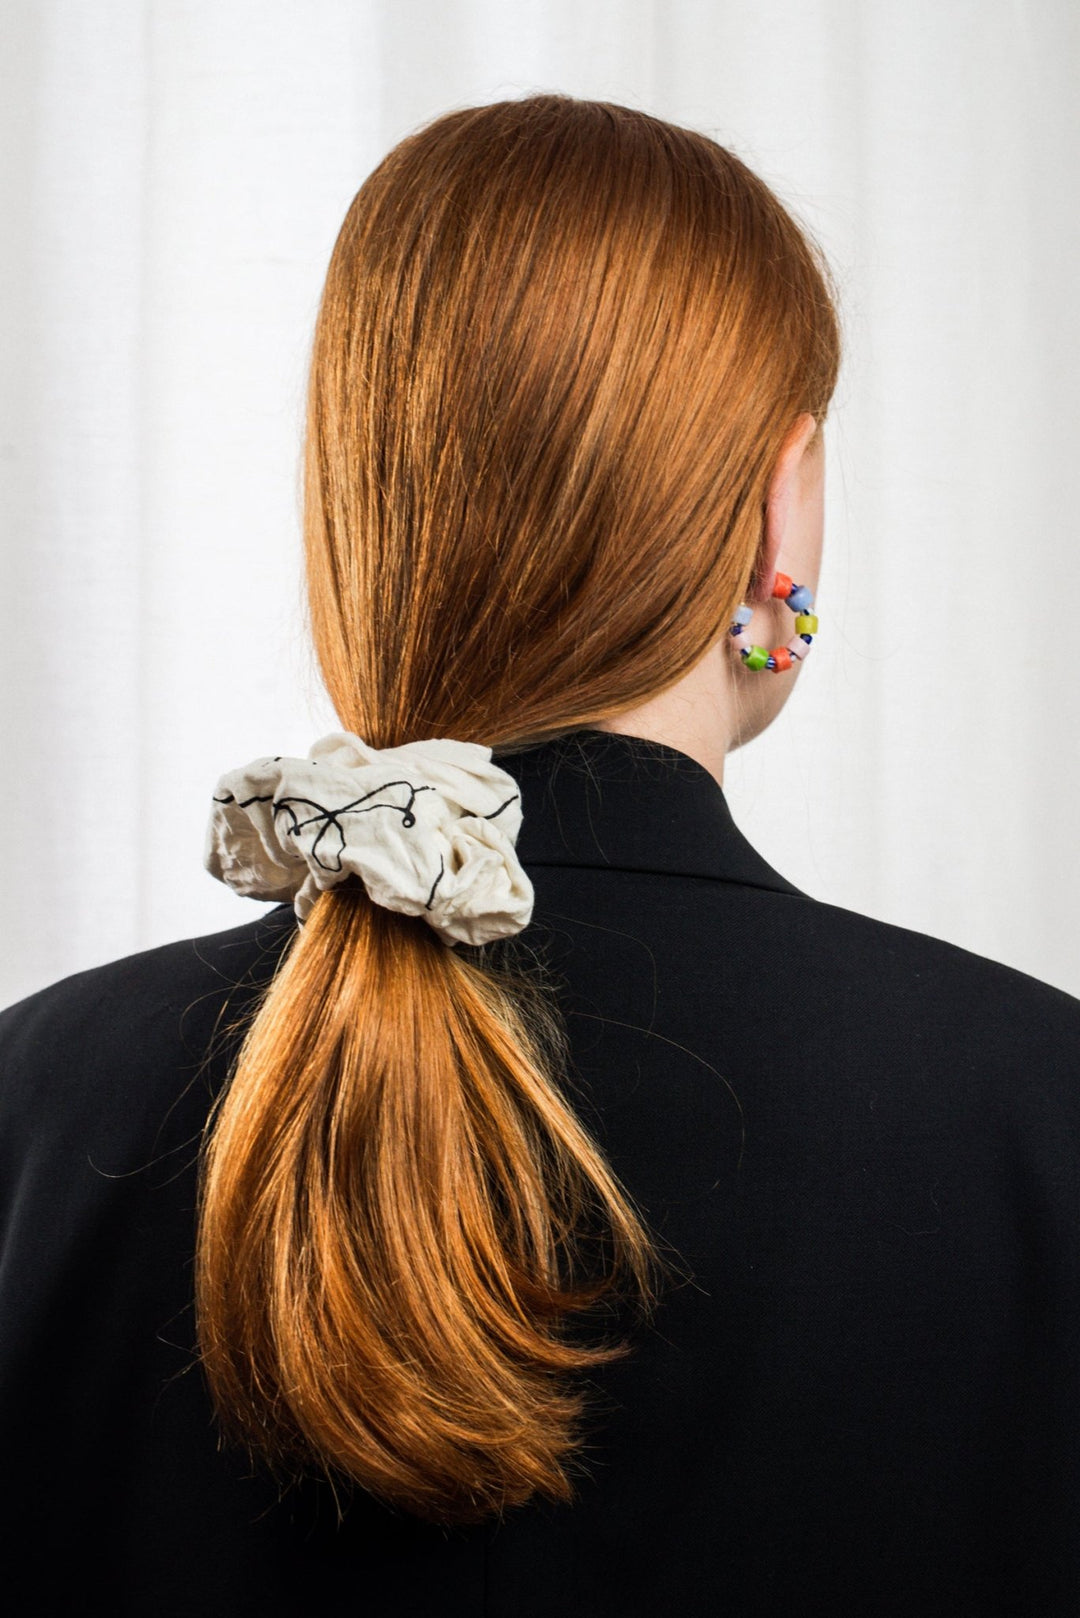 Scrunchie by Nada Duele at White Label Project